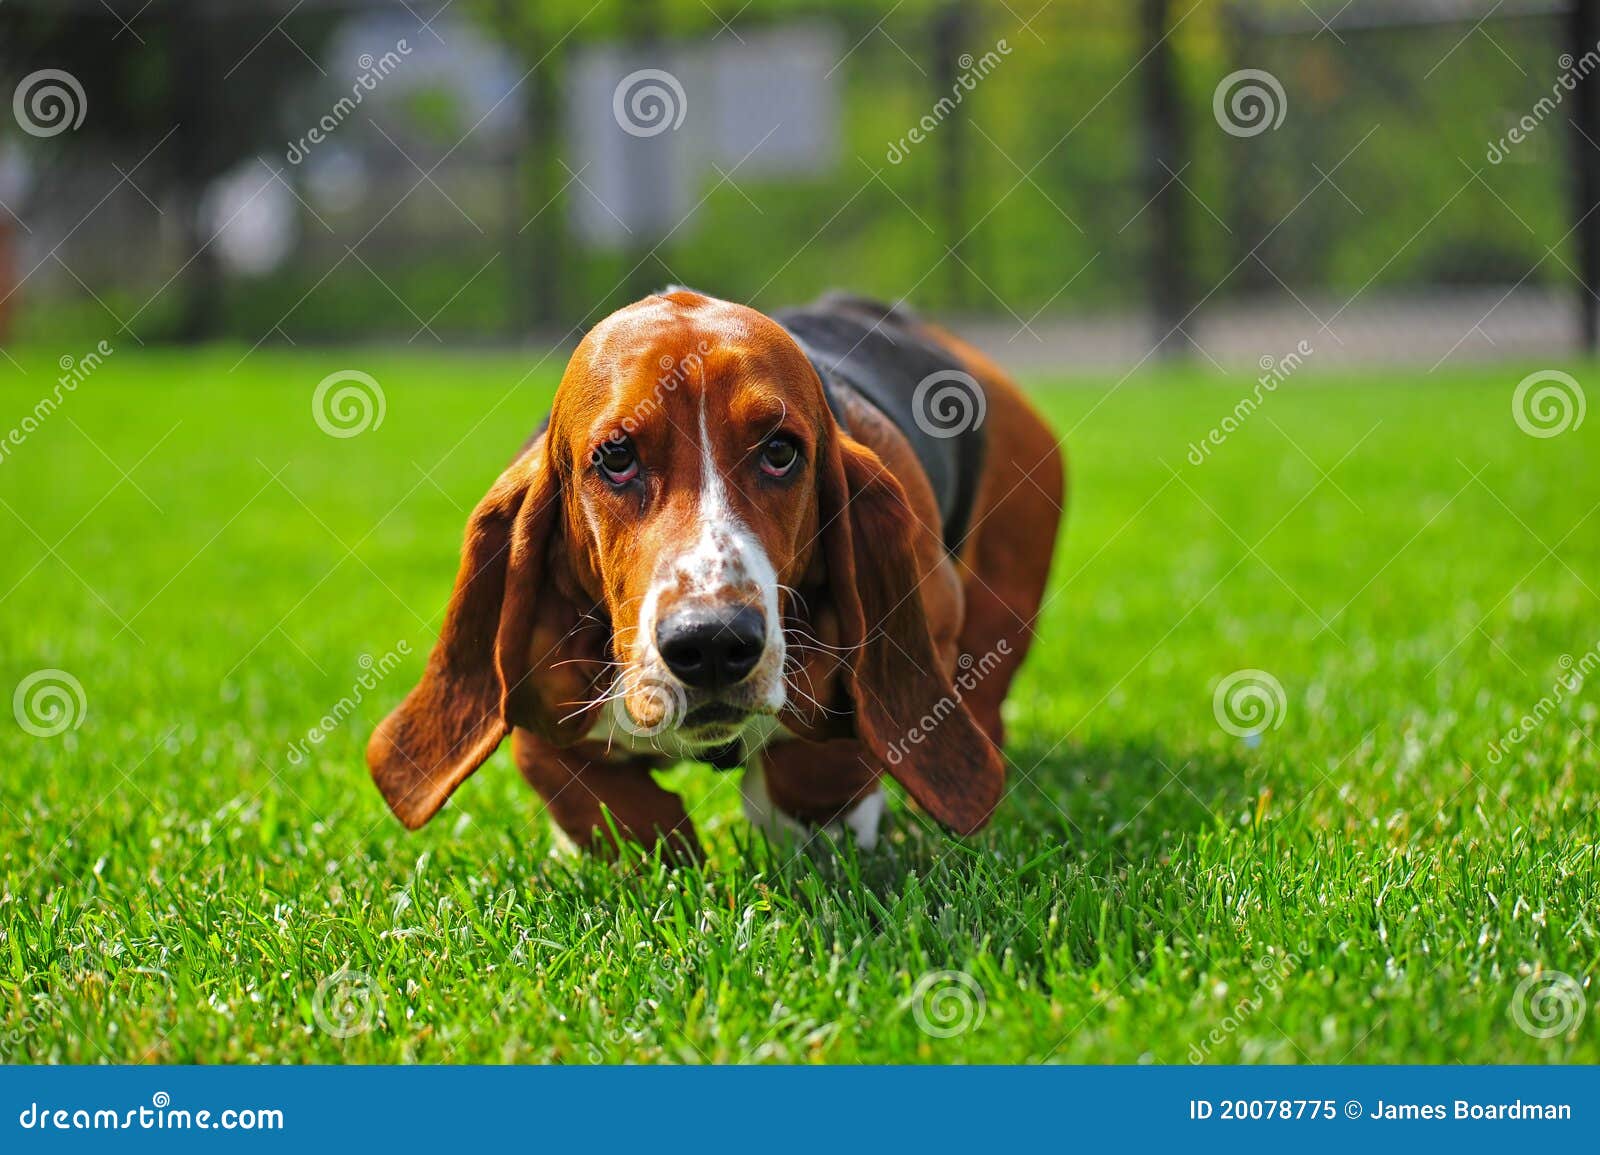 basset hound whiskers